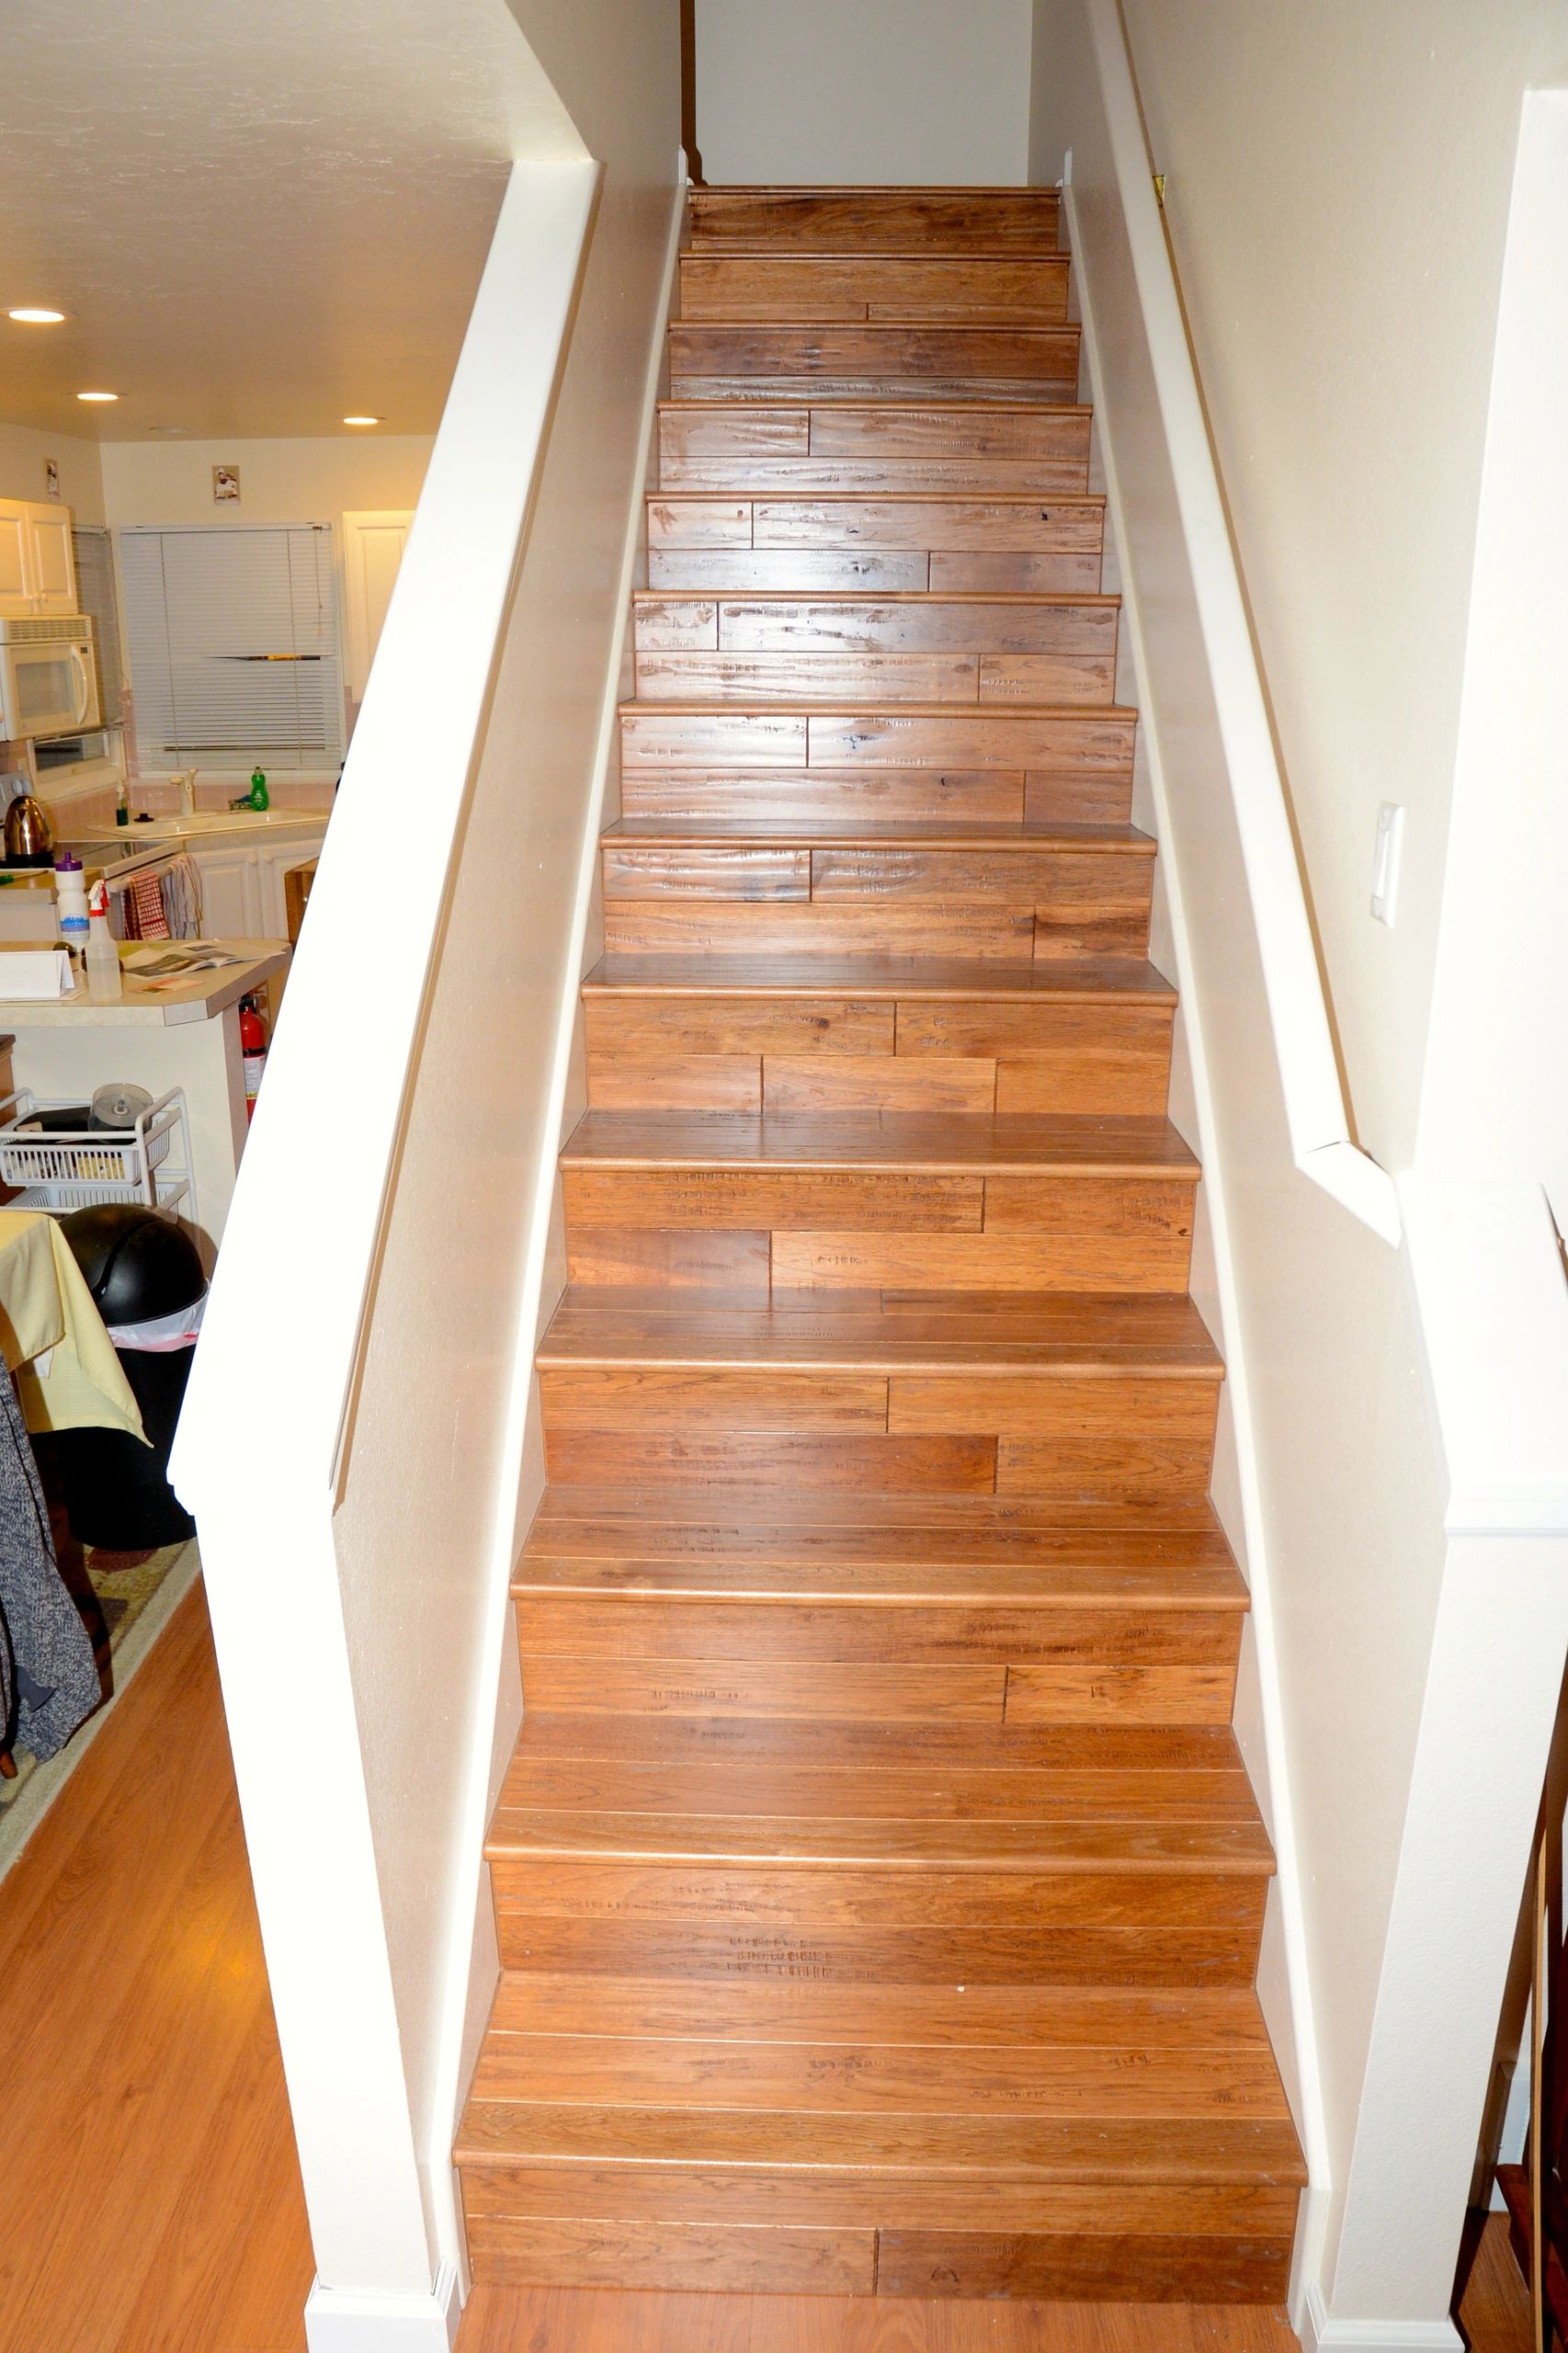 Stairs with hardwood treads and risers.